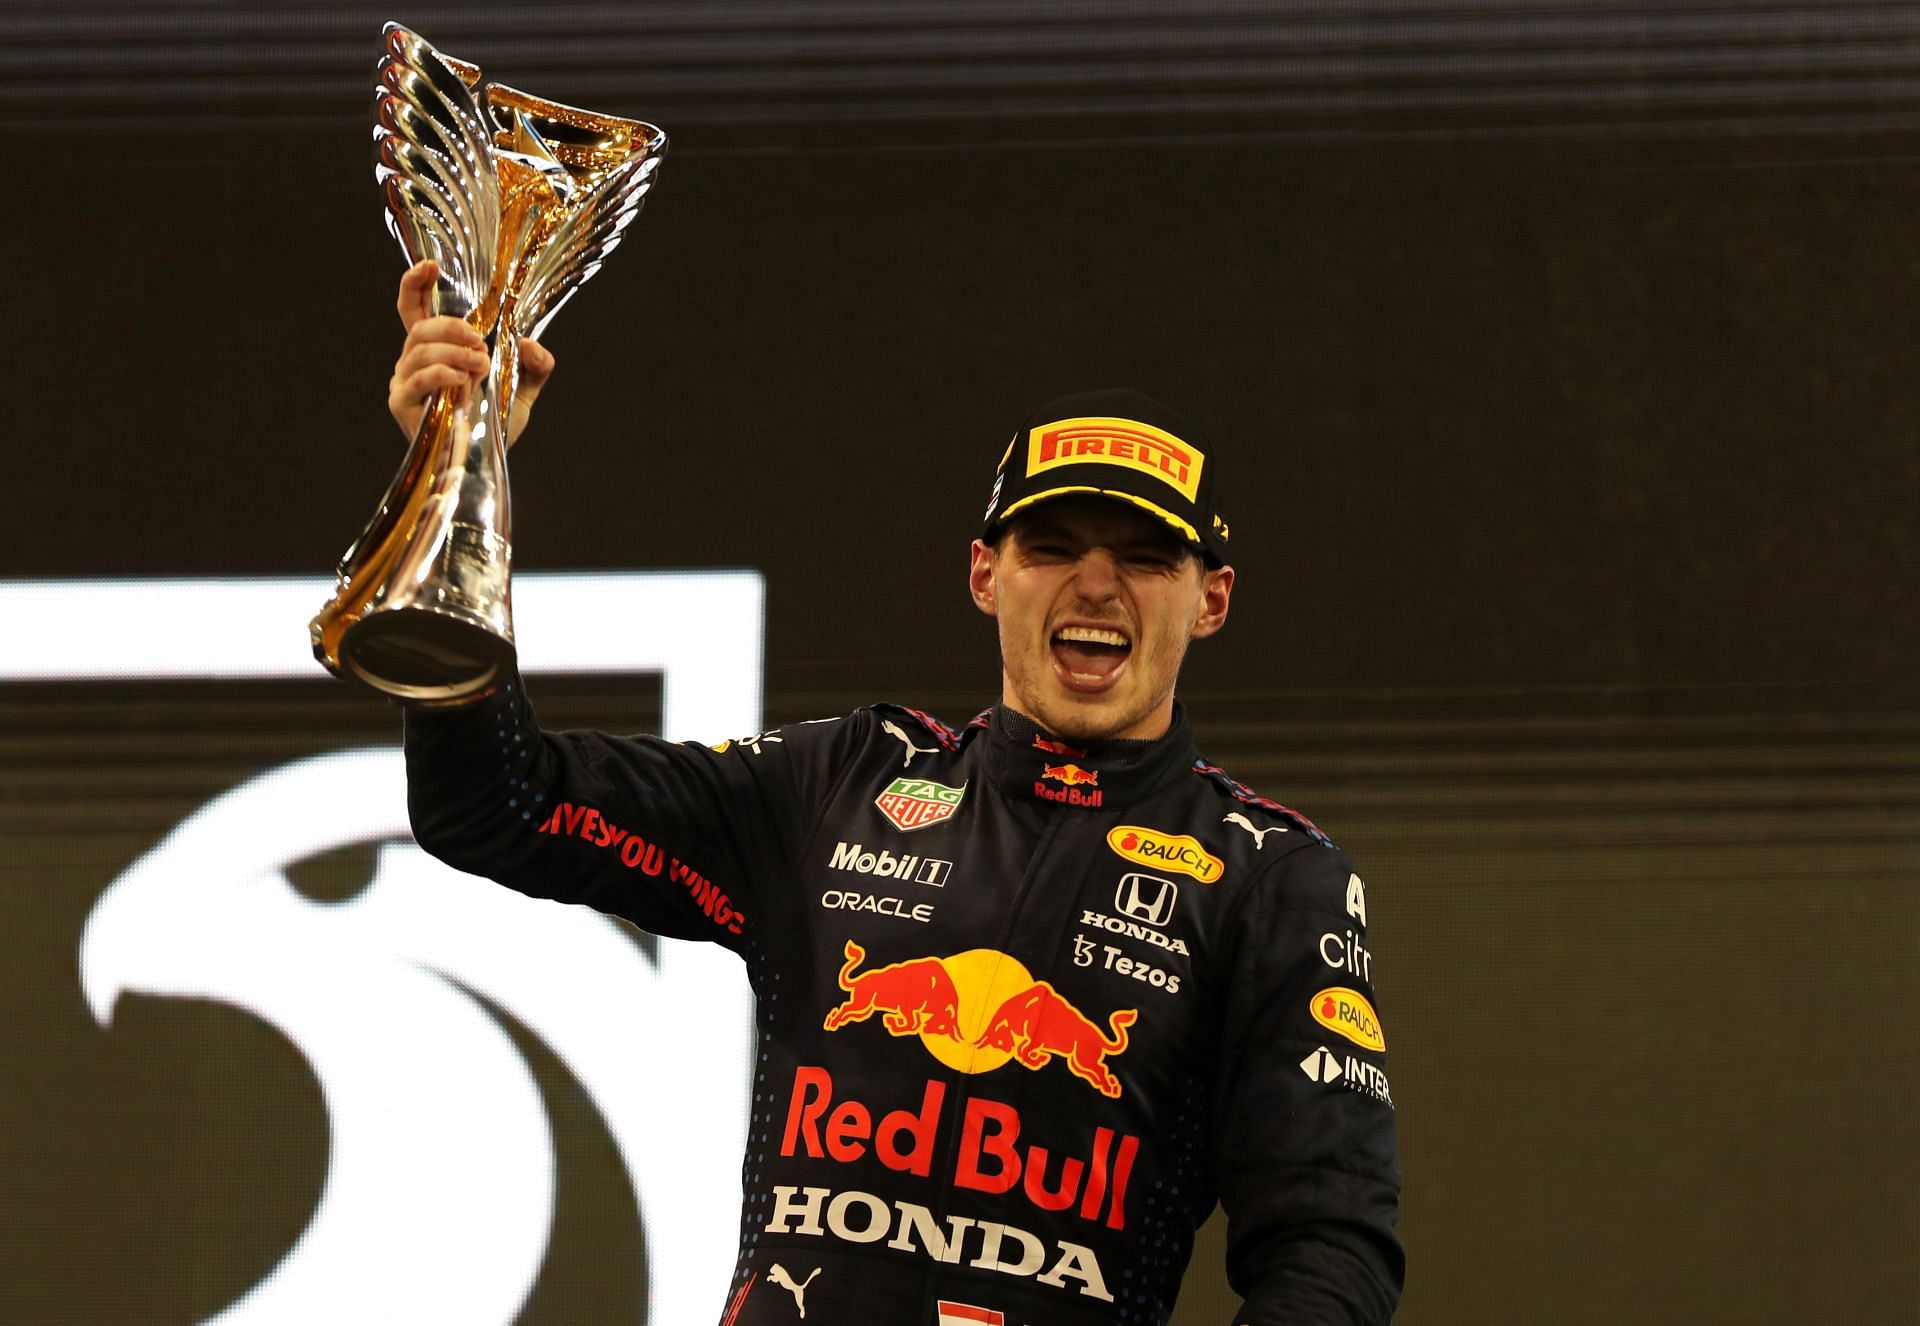 Max Verstappen How much money does he make in F1?